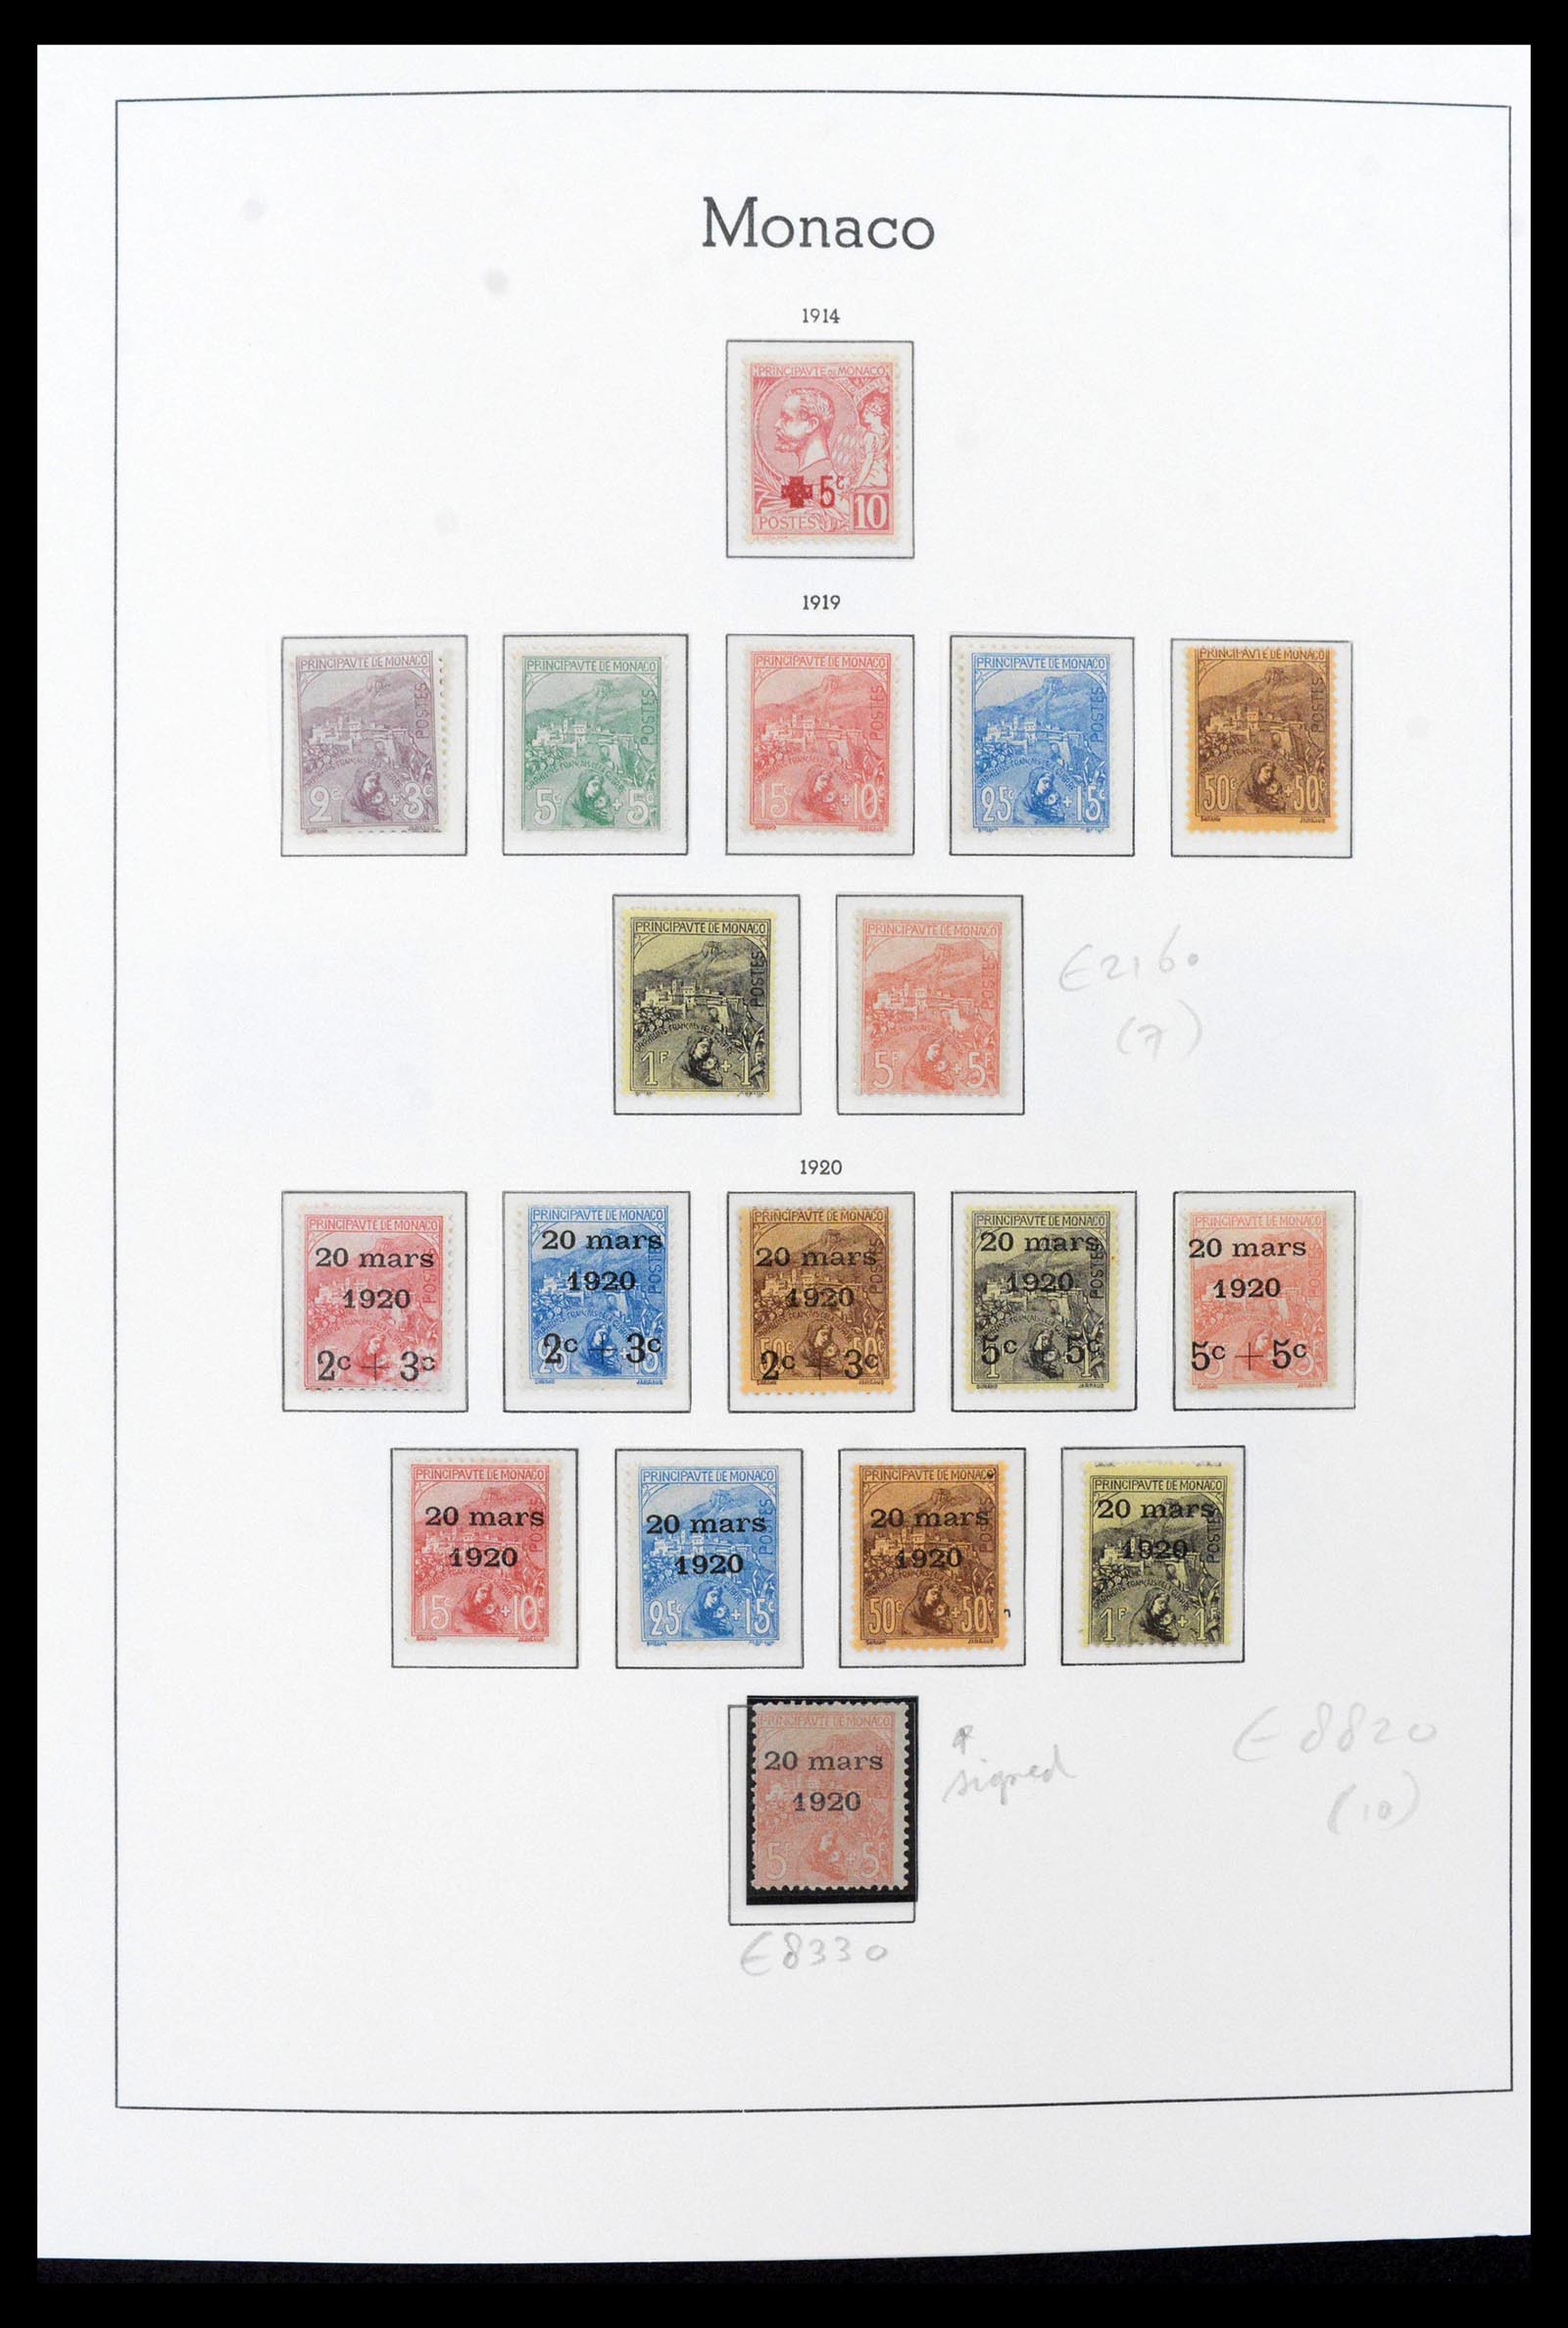 39390 0003 - Stamp collection 39390 Monaco complete 1885-1990.